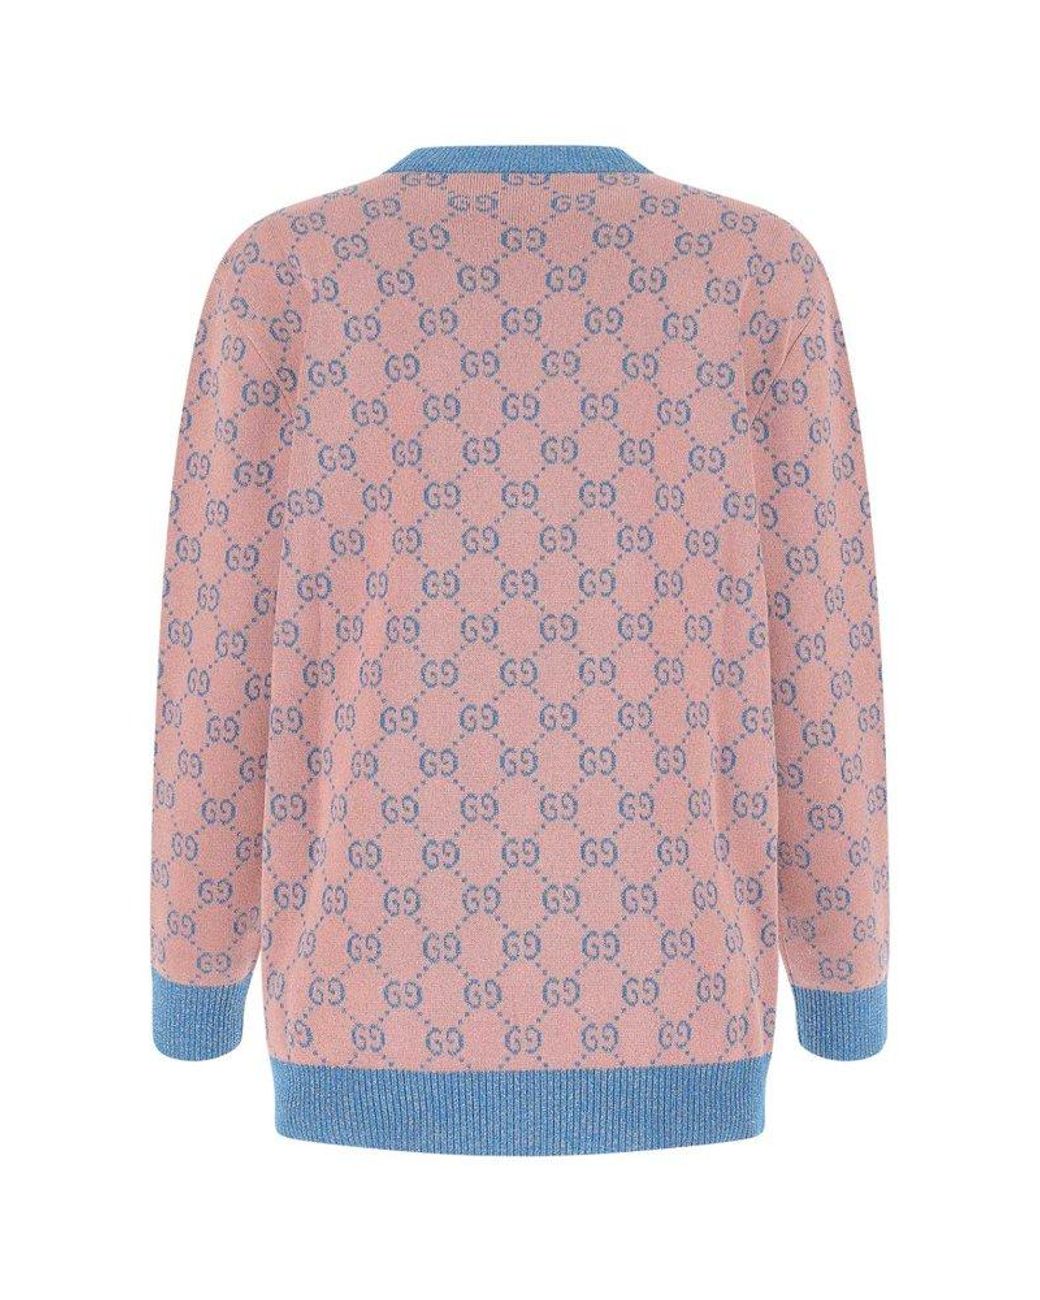 Gucci Bear Wool Jacquard Sweater in Pink for Men